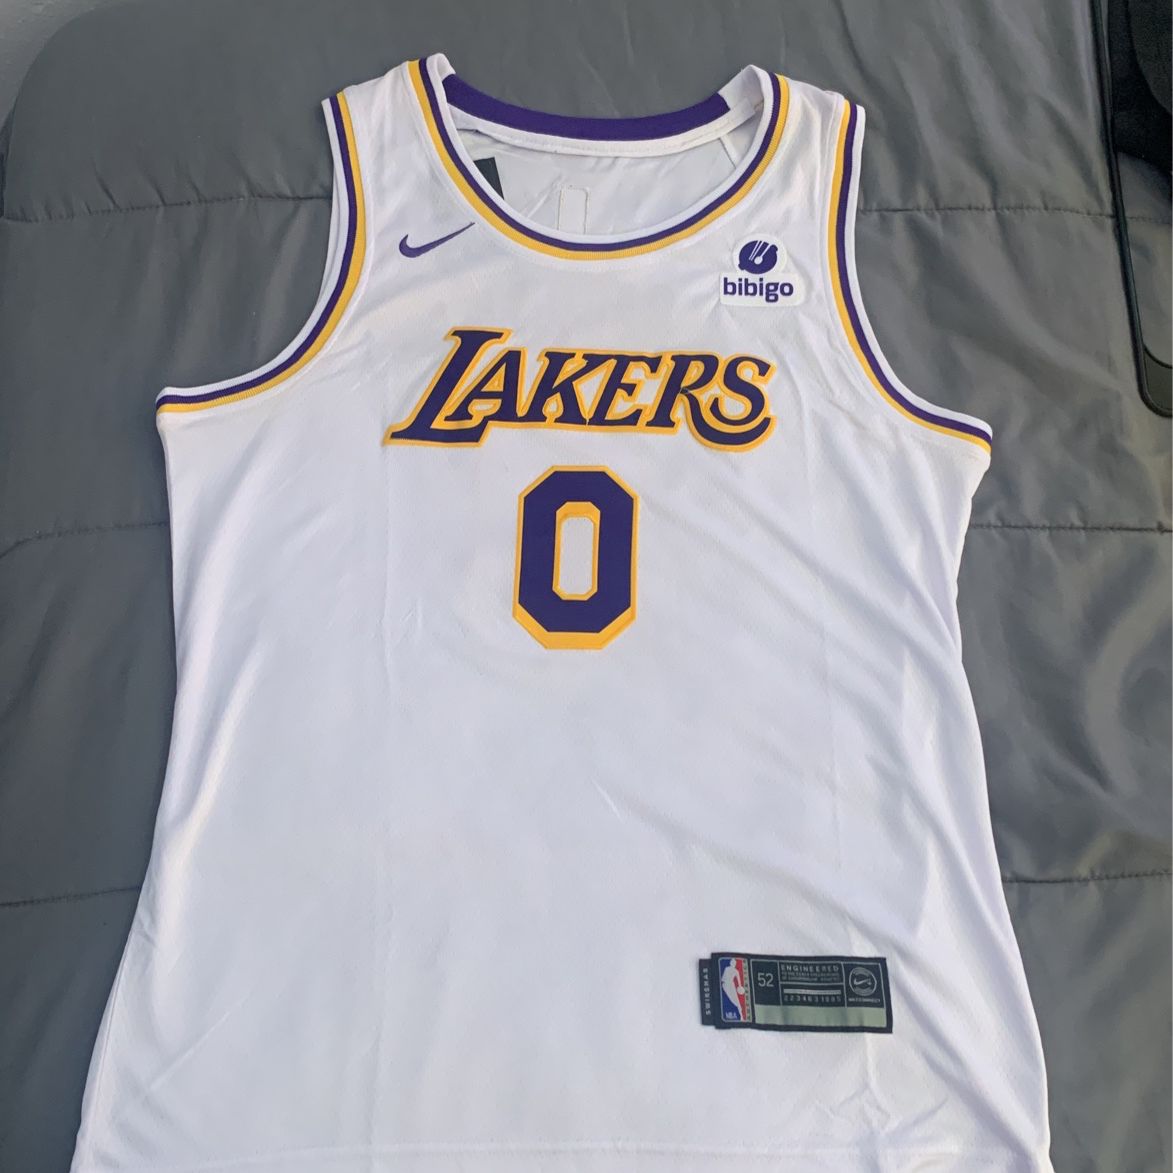 LAKERS WESTBROOK JERSEY SIZE S, M, L, XL, XXL for Sale in Sunland Park, NM  - OfferUp